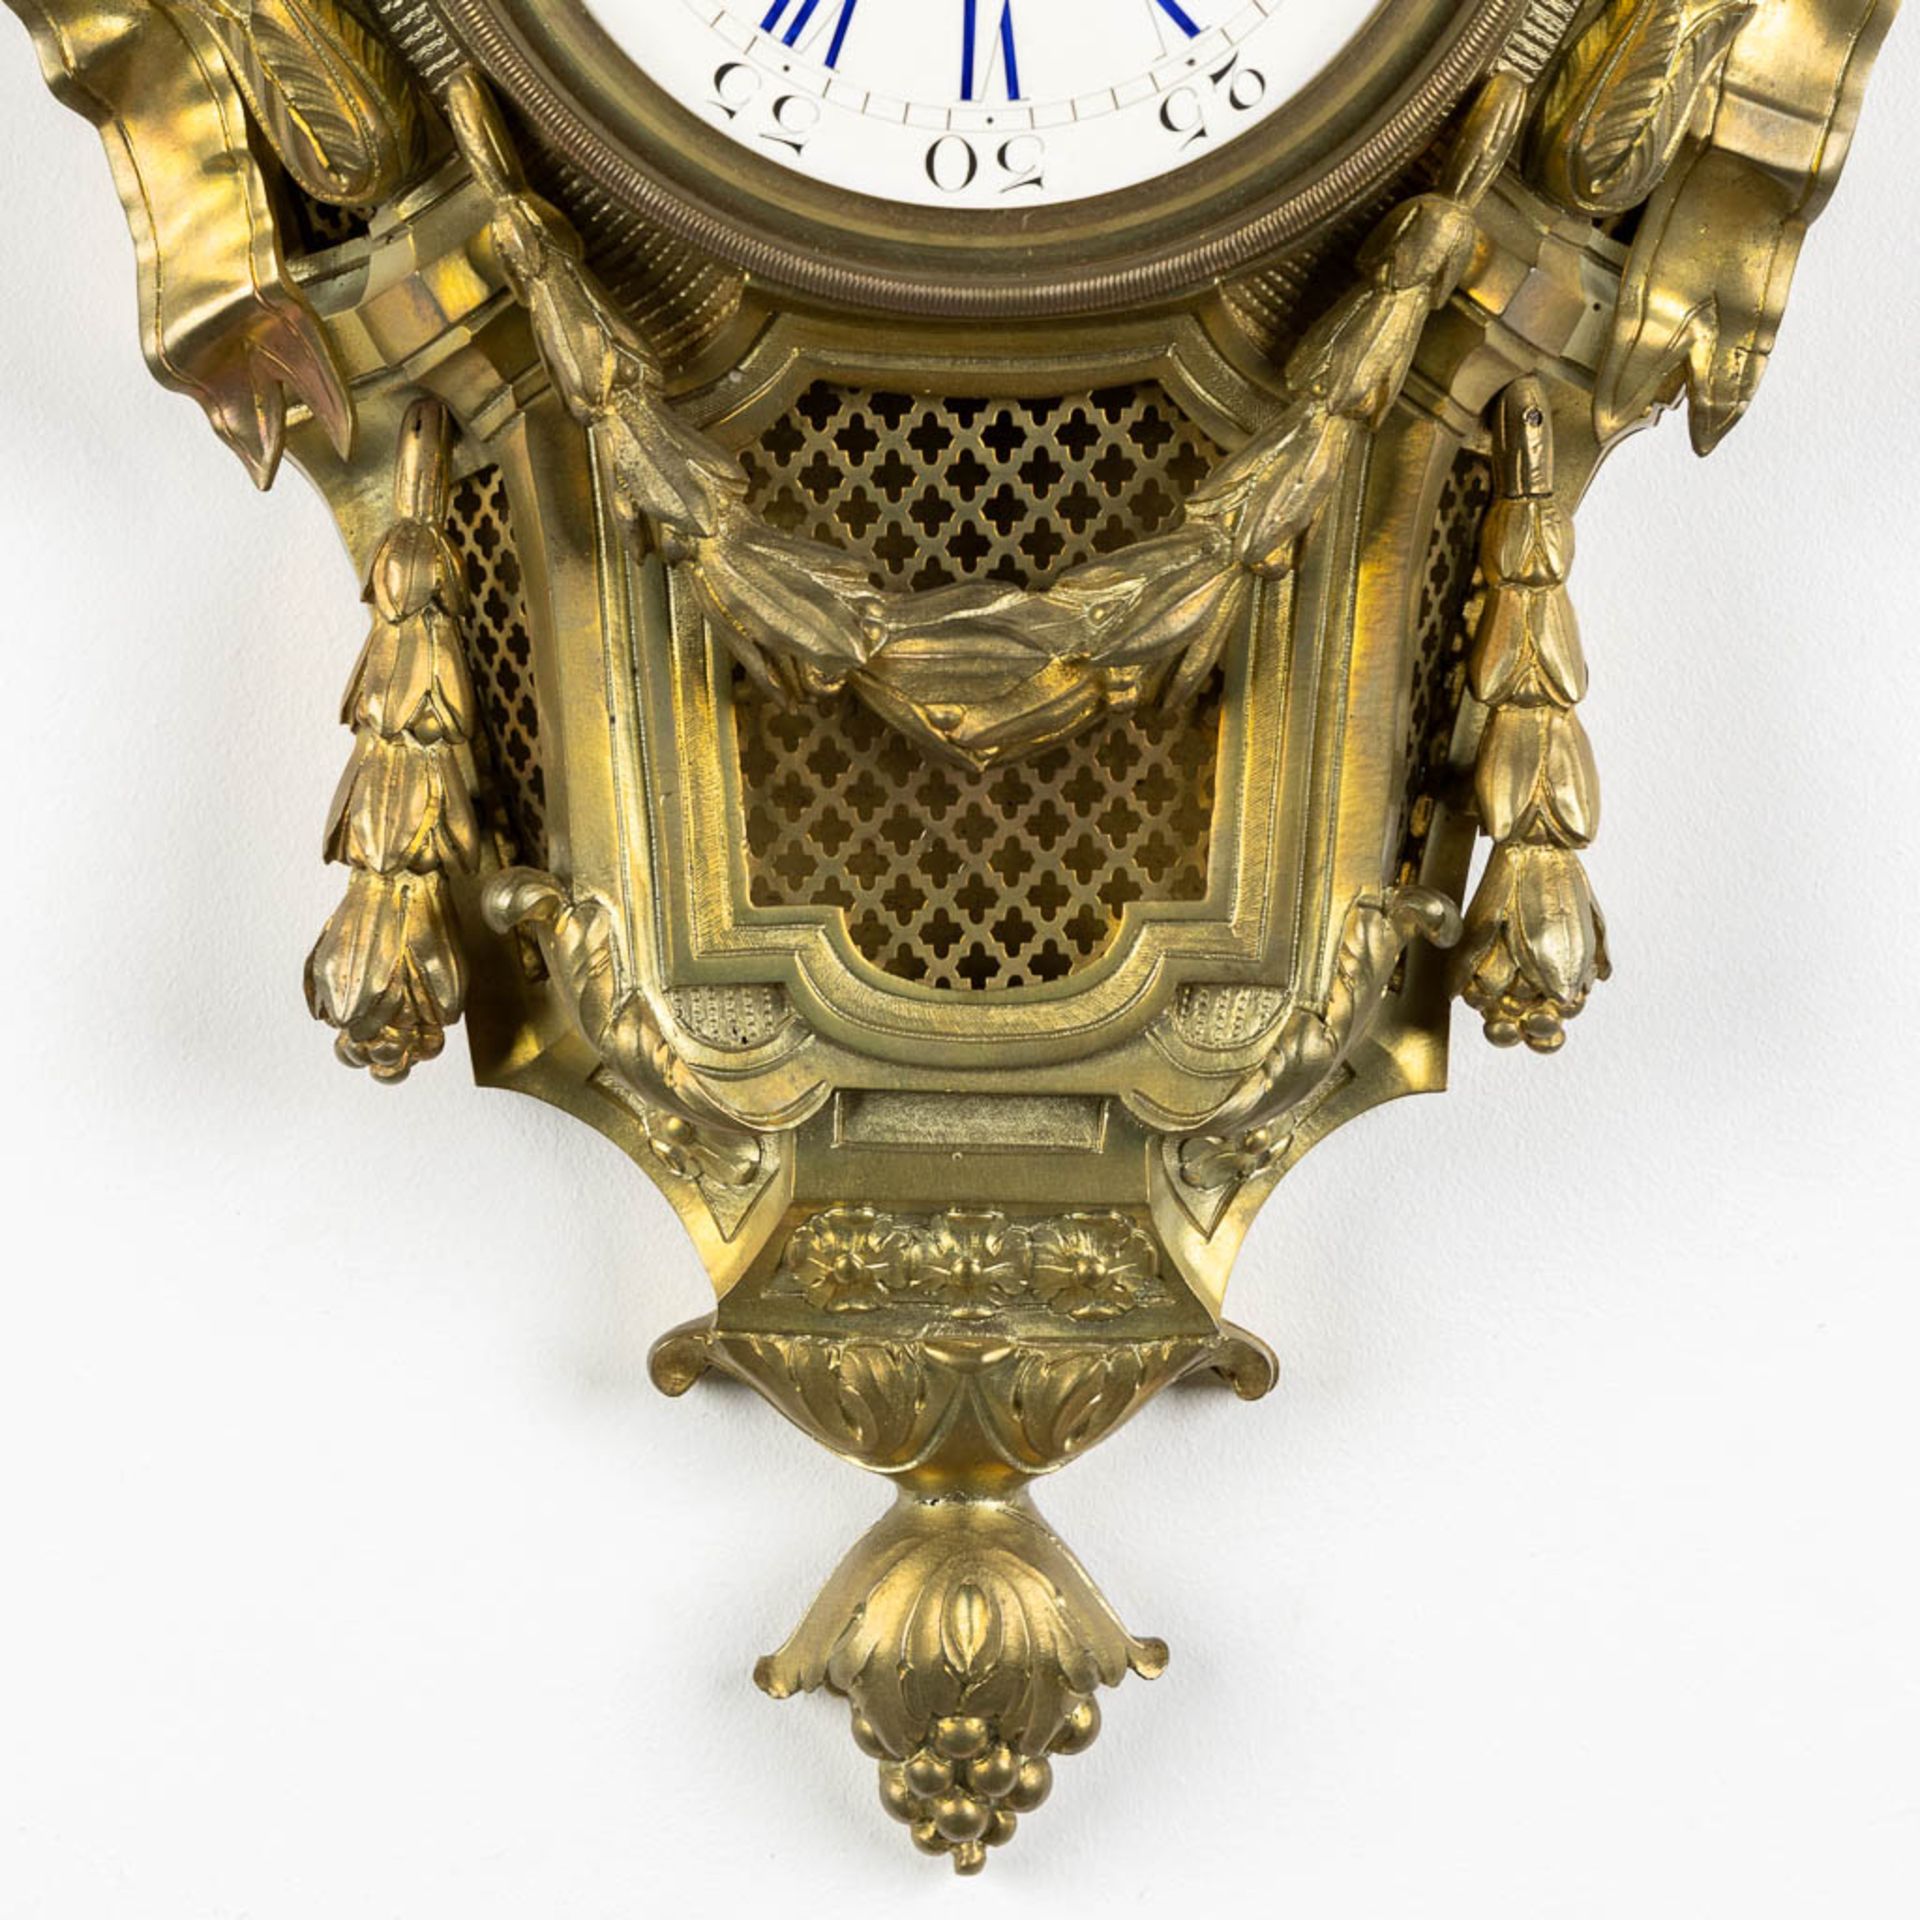 A wall-mounted bronze cartel clock, Louis XVI style. 19th C. (L:12 x W:37 x H:71 cm) - Image 5 of 7